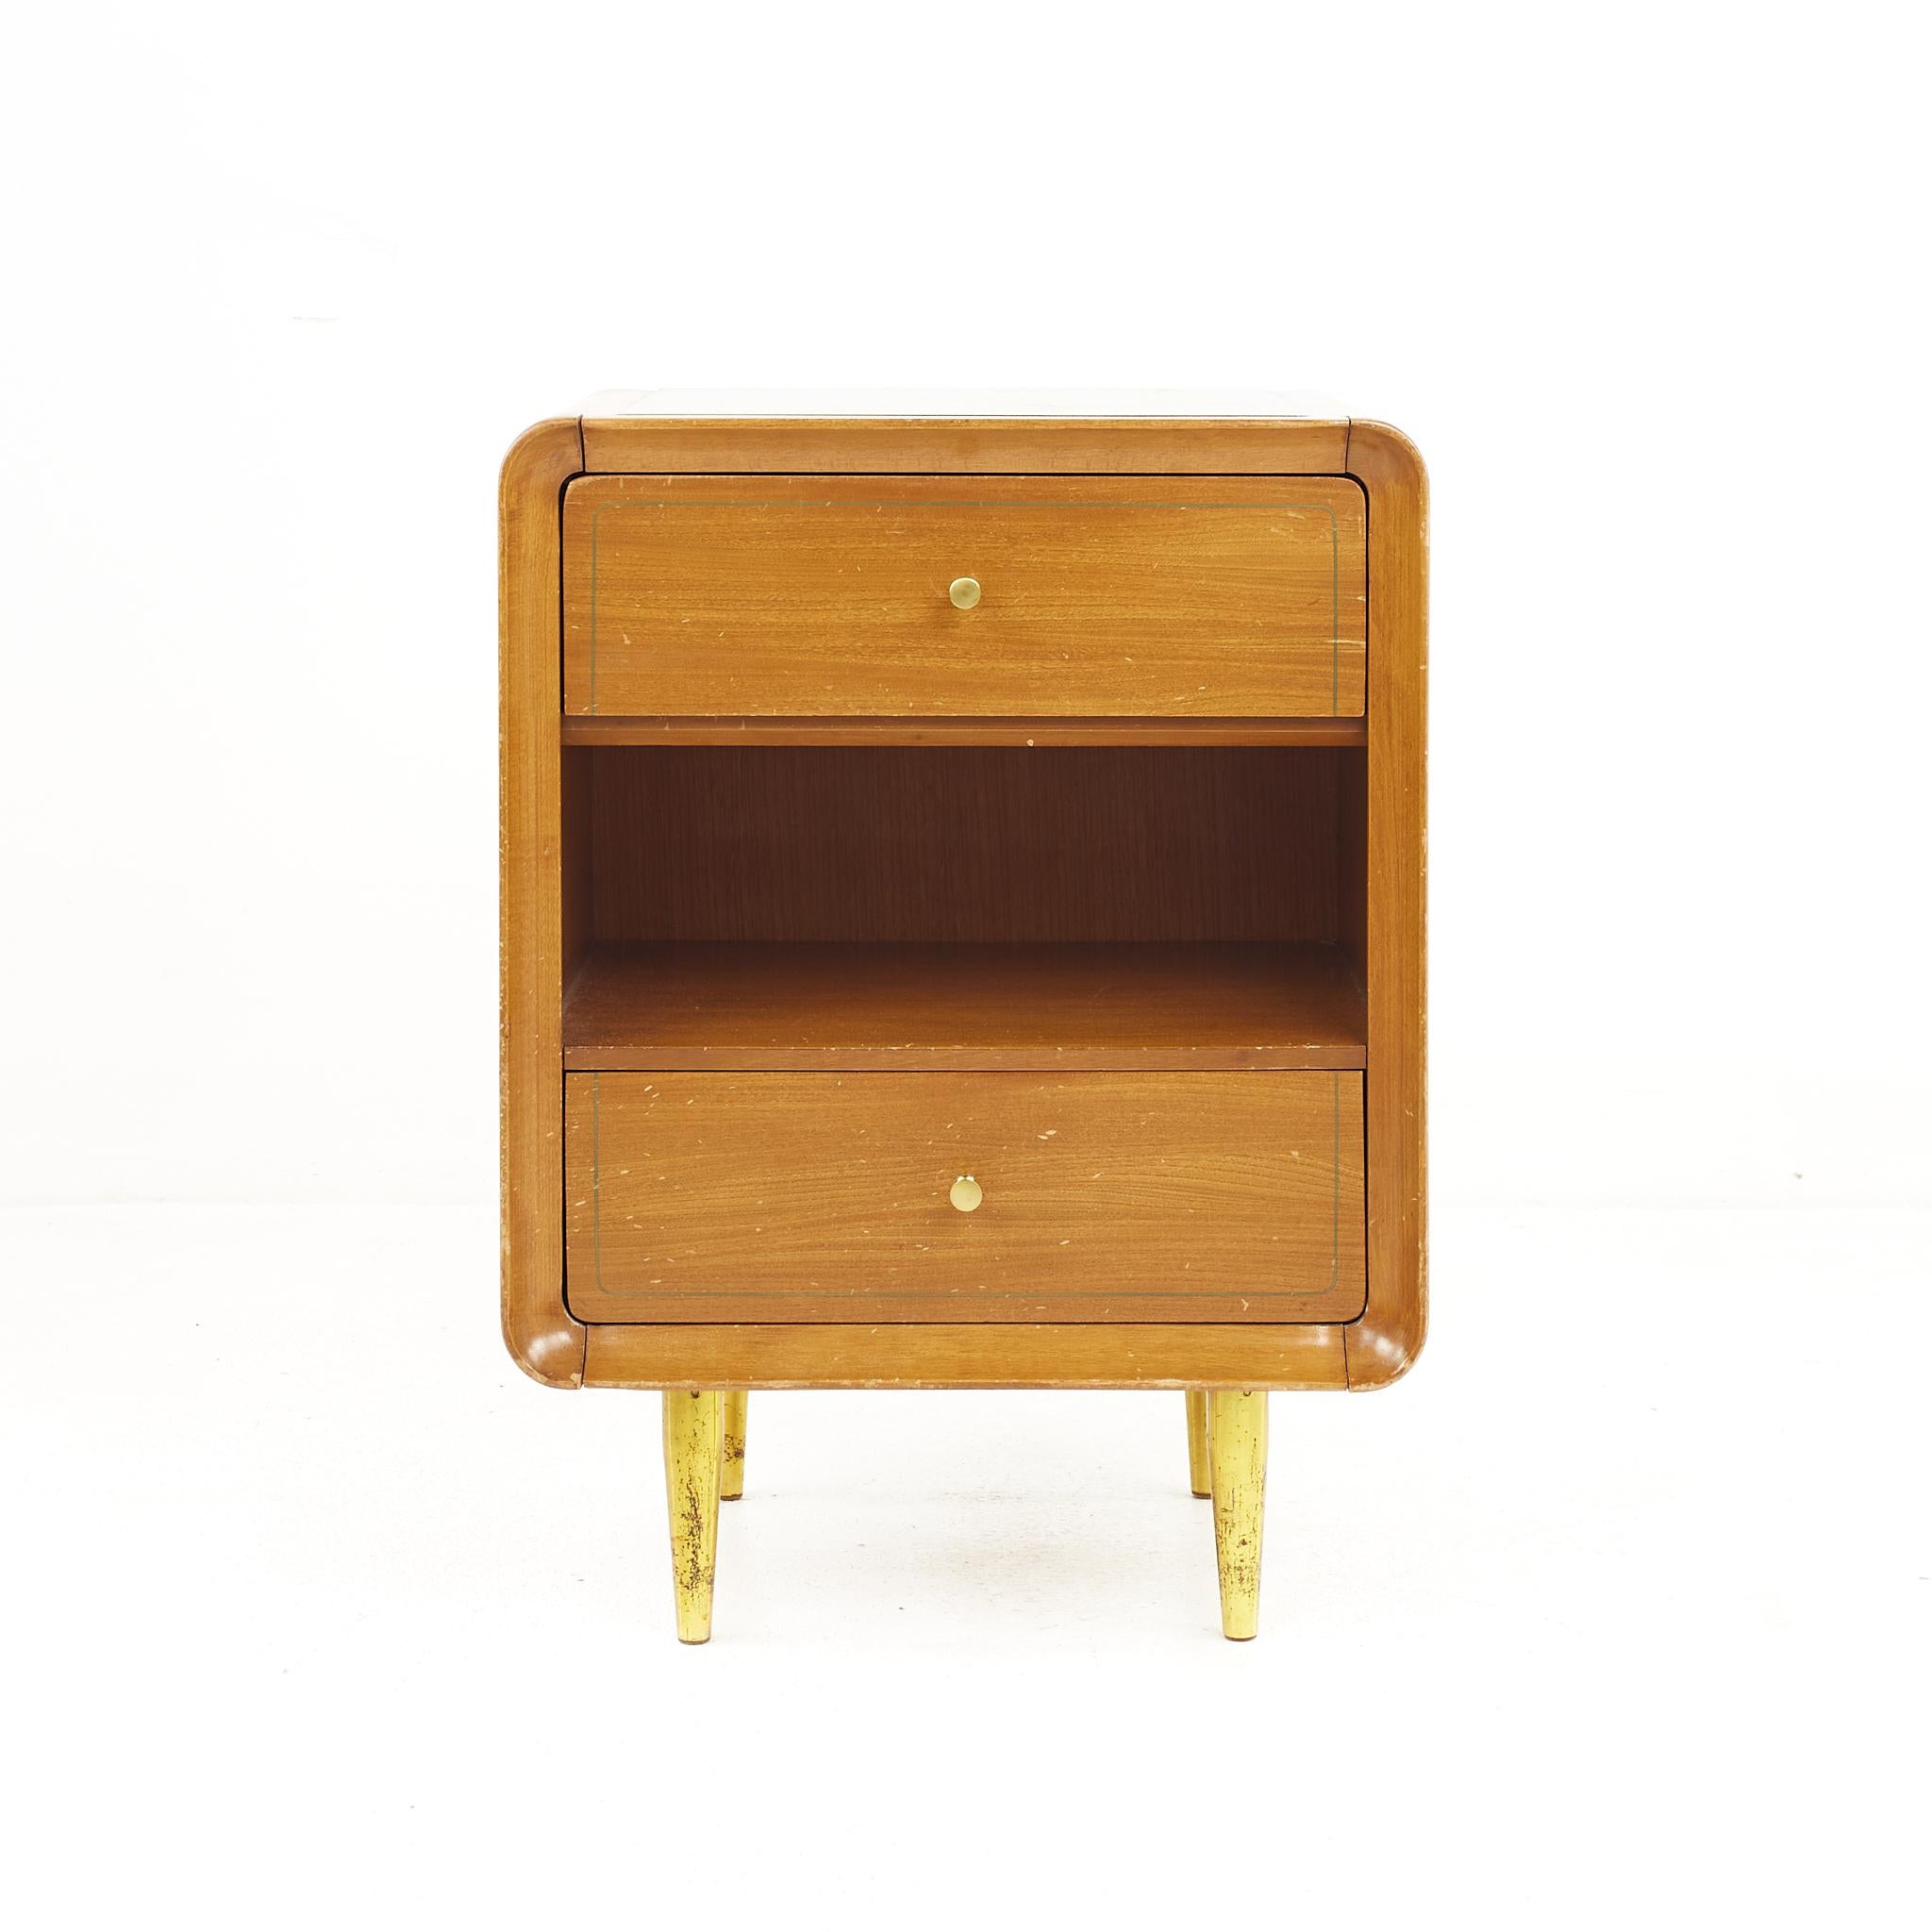 Cavalier mid-century walnut and brass 2 drawer nightstand.

The nightstand measures: 20 wide x 15 deep x 27.25 inches high.

All pieces of furniture can be had in what we call restored vintage condition. That means the piece is restored upon